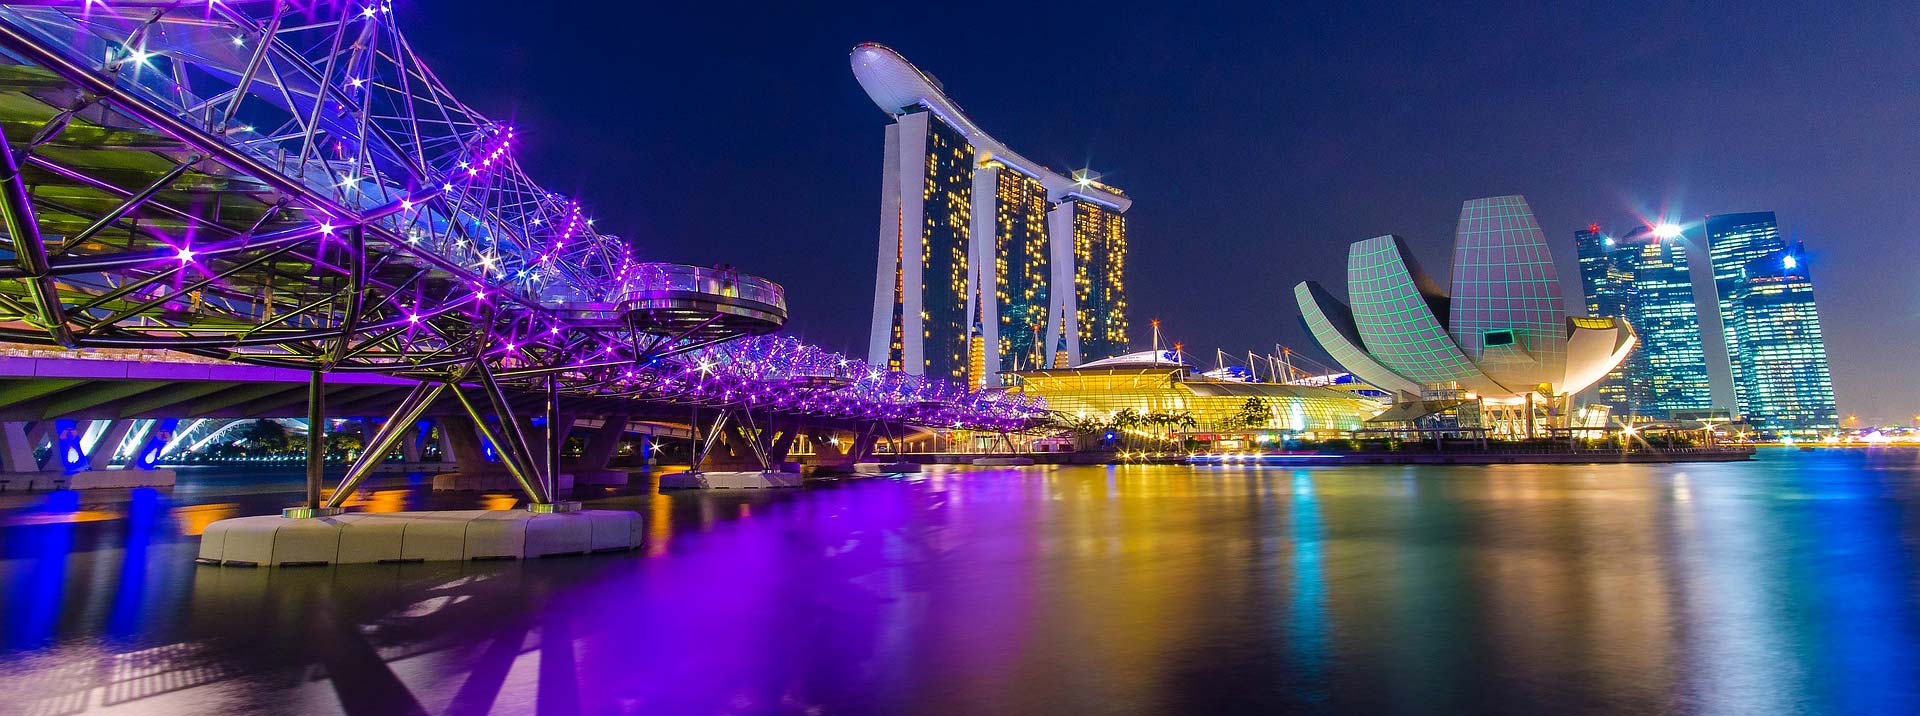 Discounted flight tickets to Singapore from Sydney - IFlyFirstClass